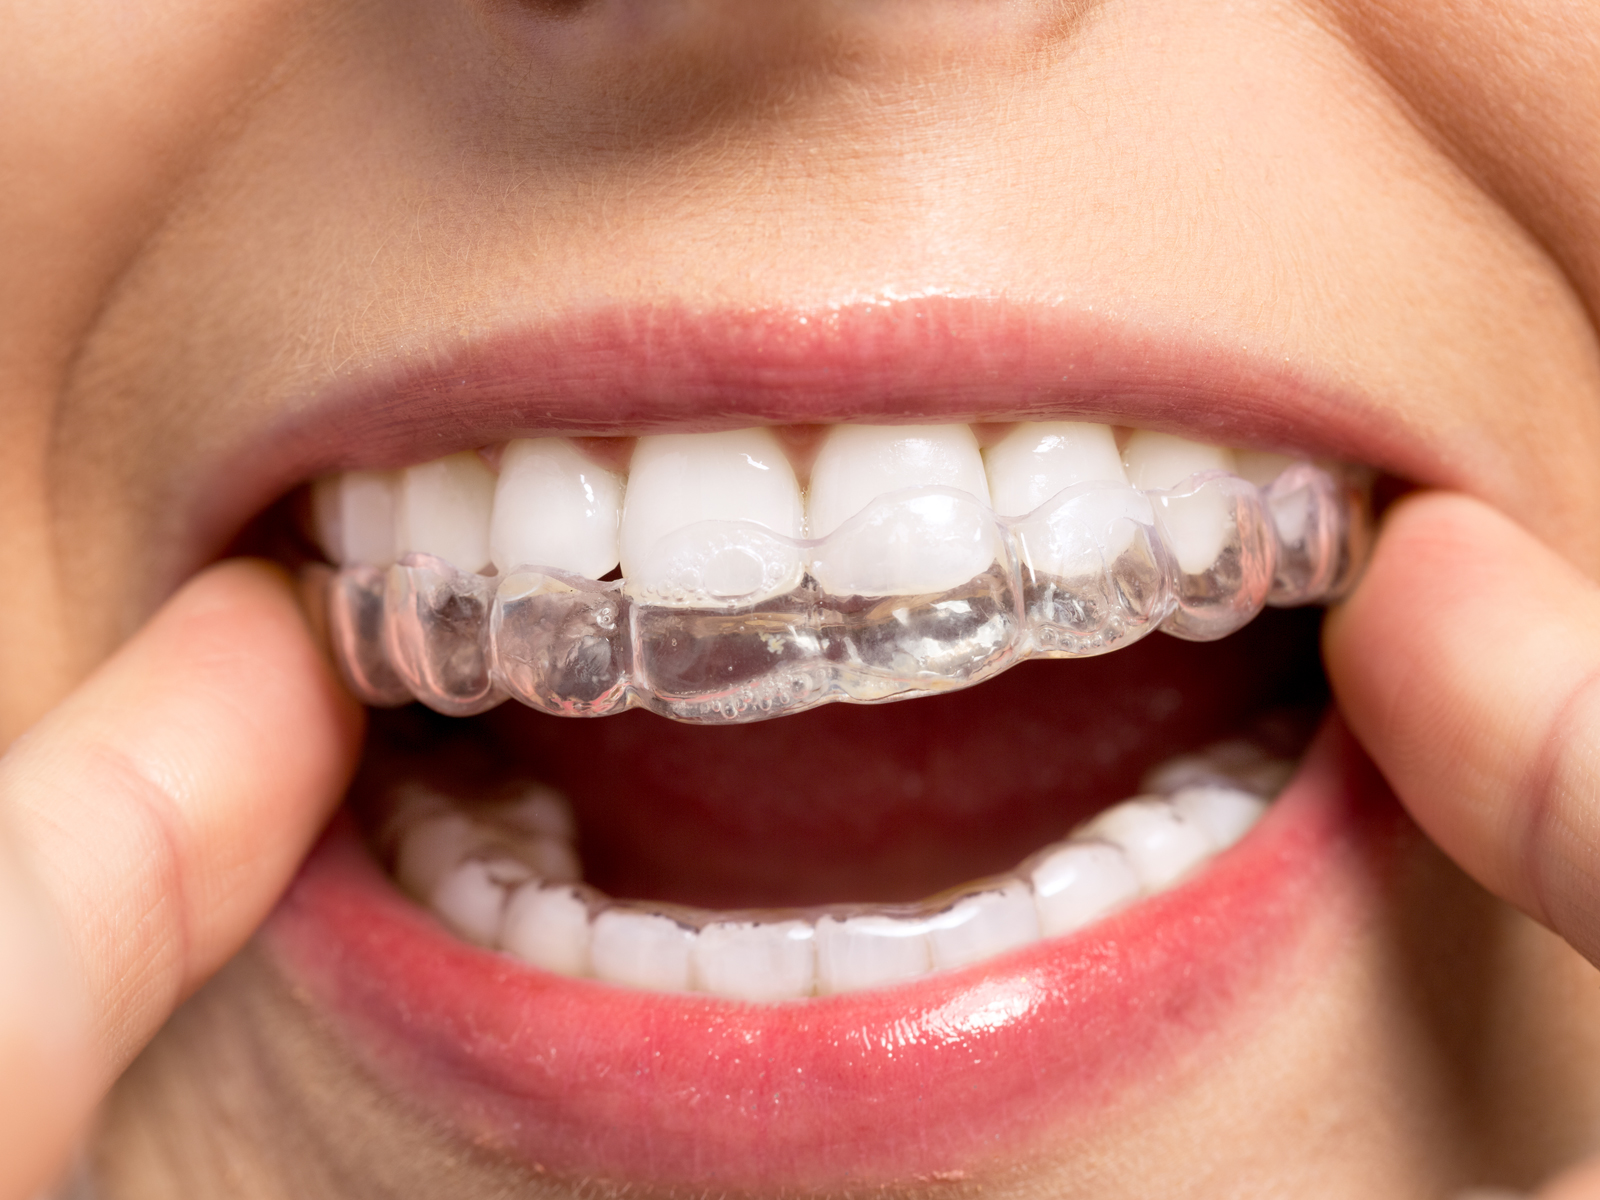 Is Invisalign The Best Solution For Underbite Treatment?